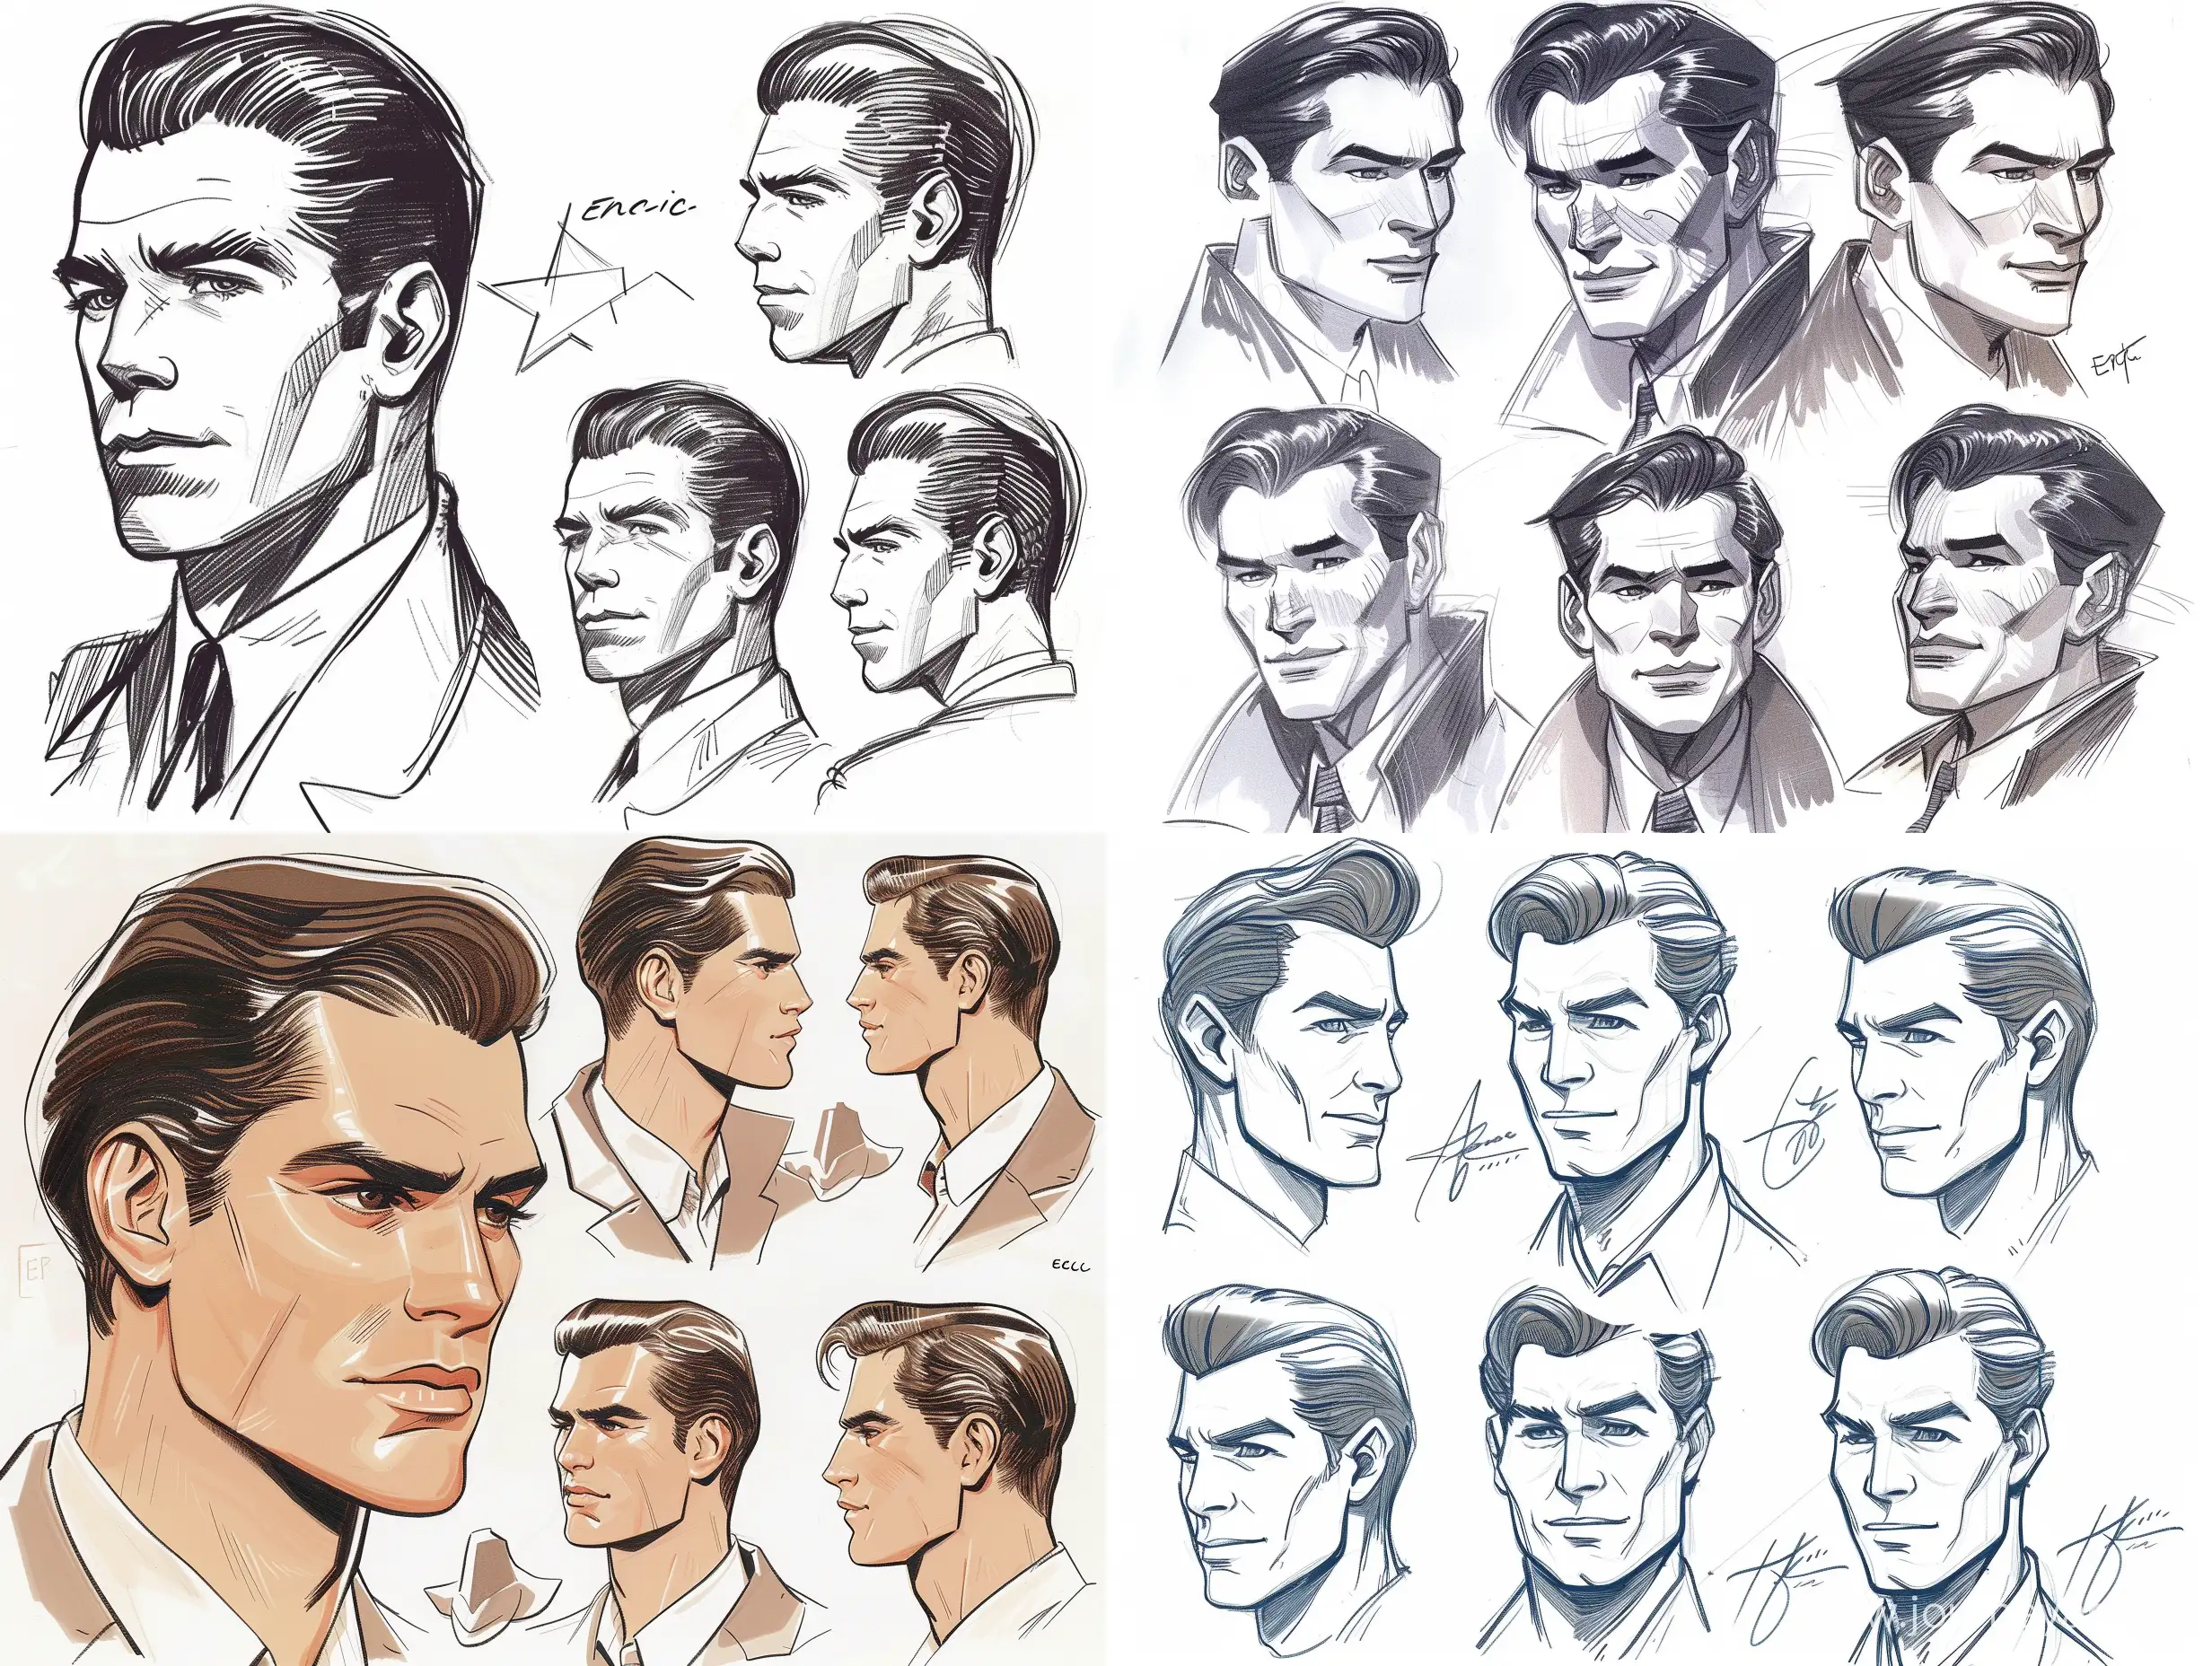 Glamorous-1940s-Movie-Star-Man-with-SlickedBack-Hair-Character-Reference-and-Expression-Sheet